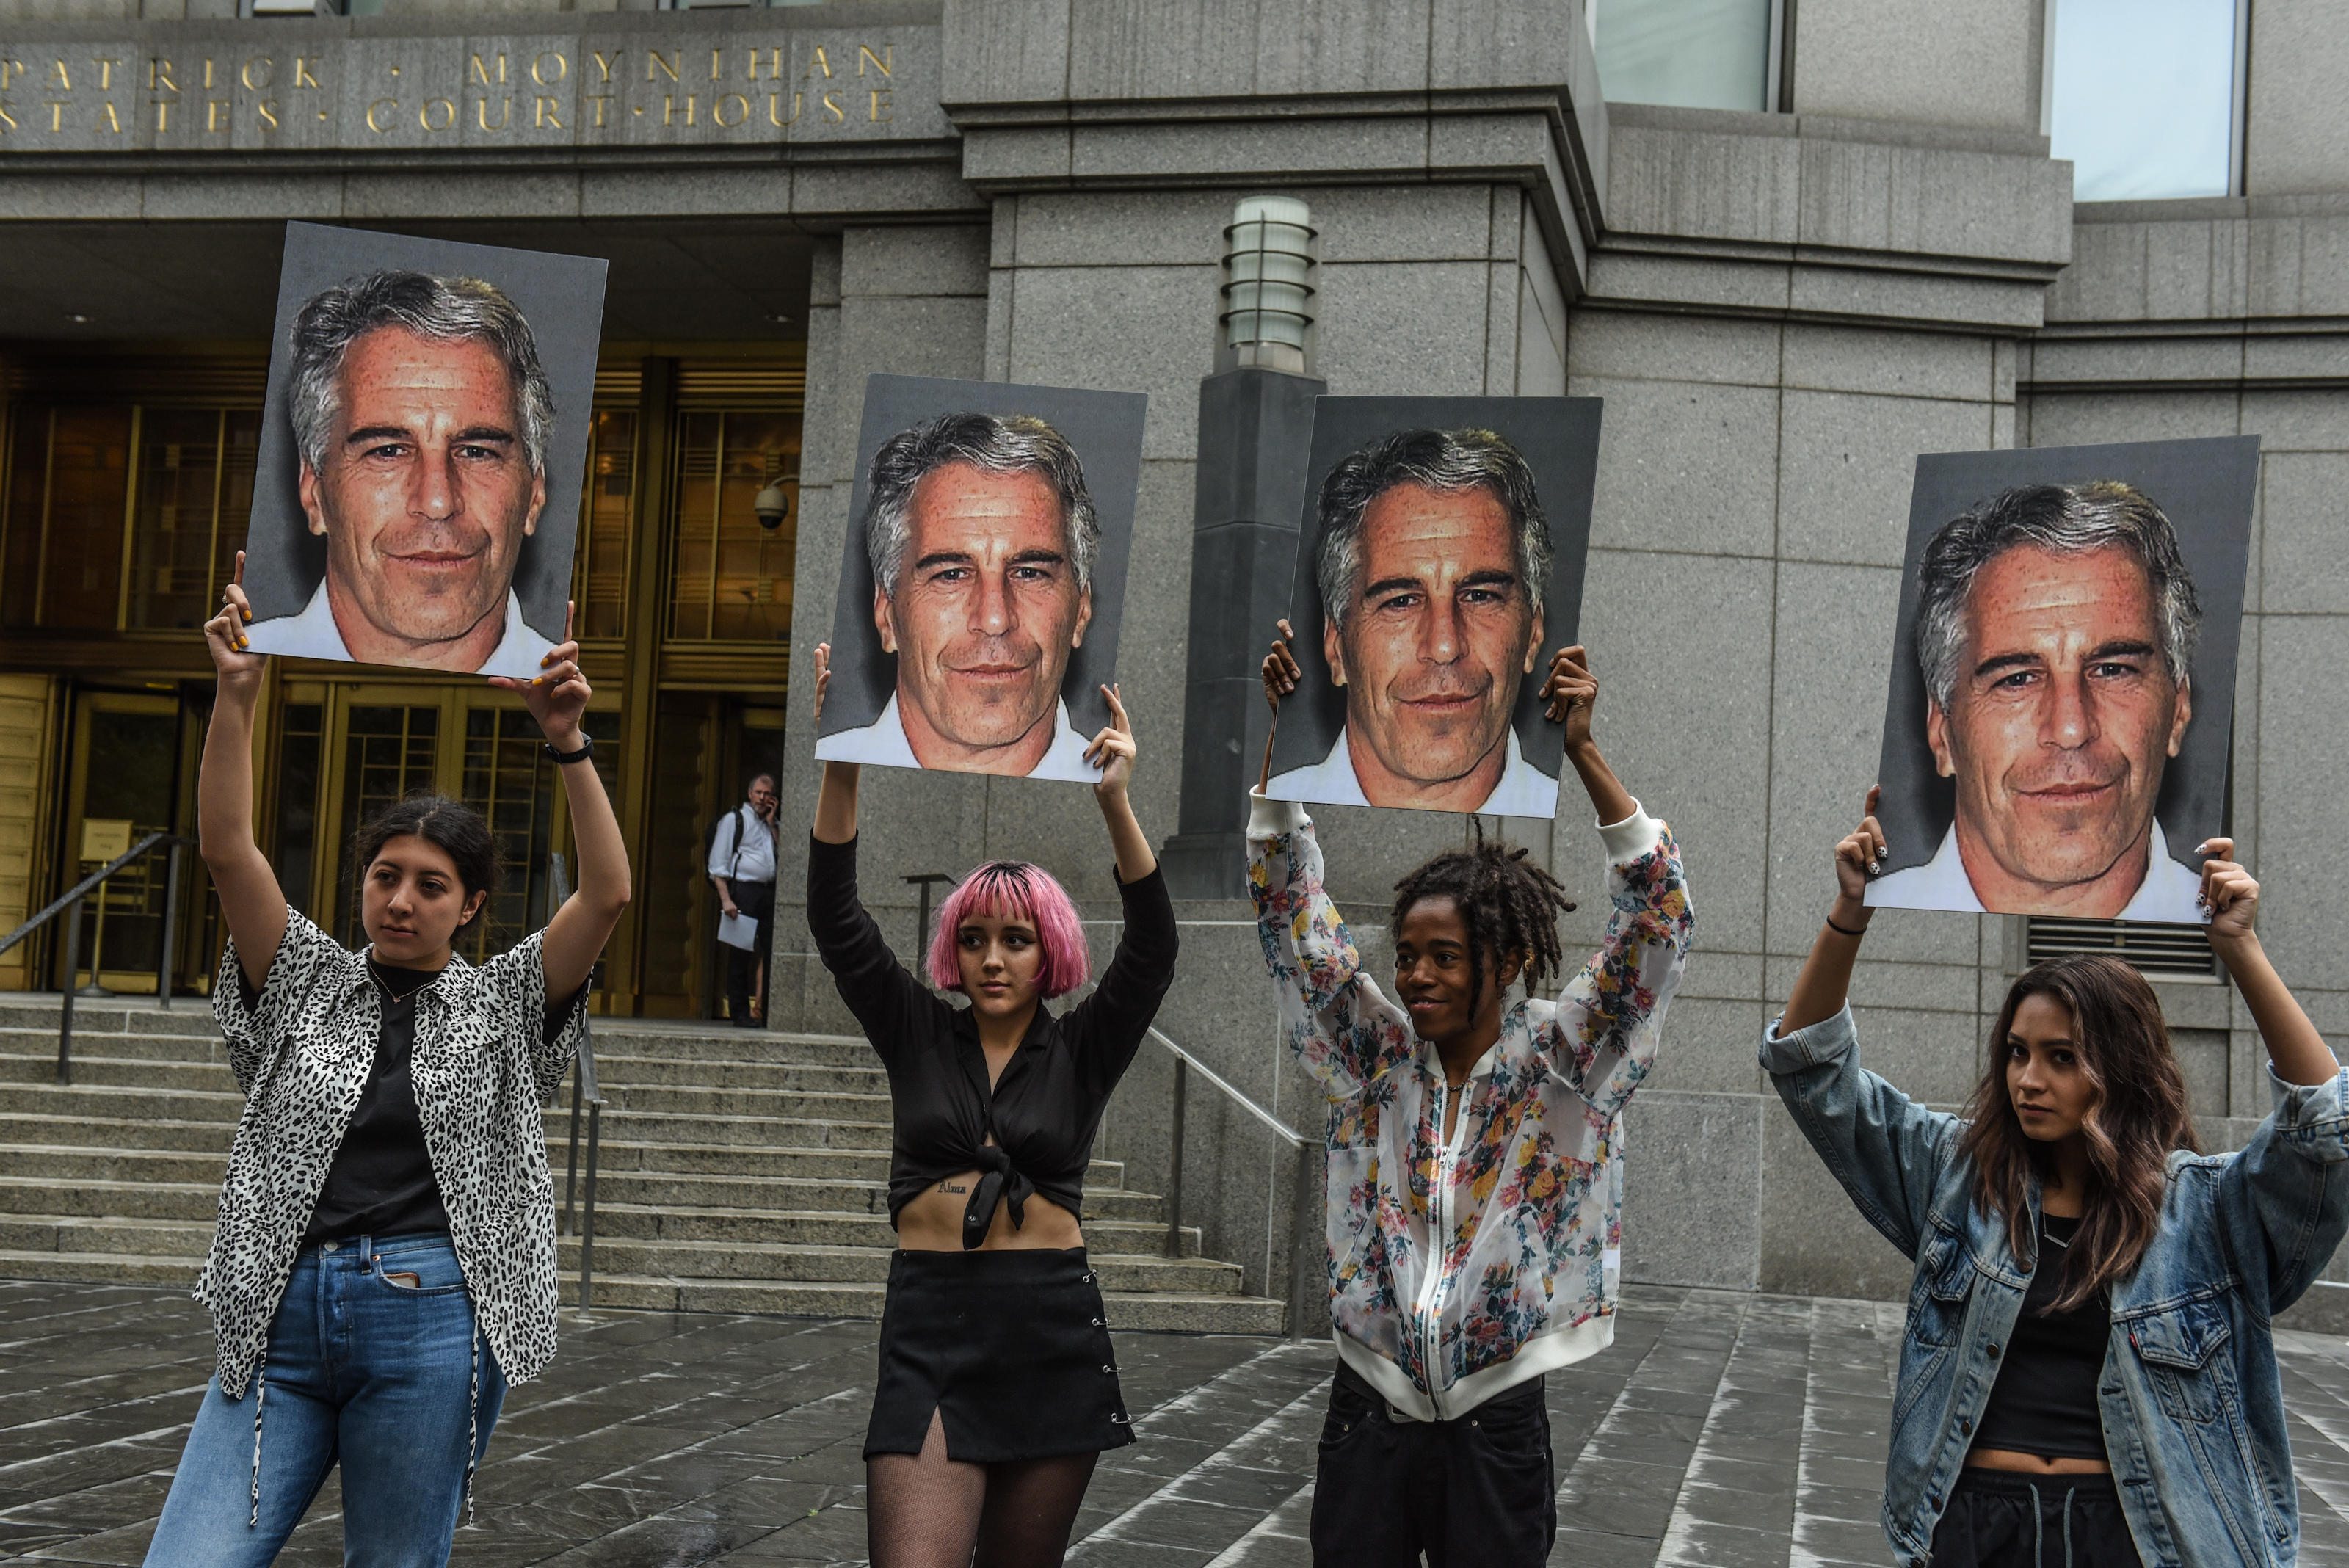 Who was Jeffrey Epstein, and what's the impact of his death?